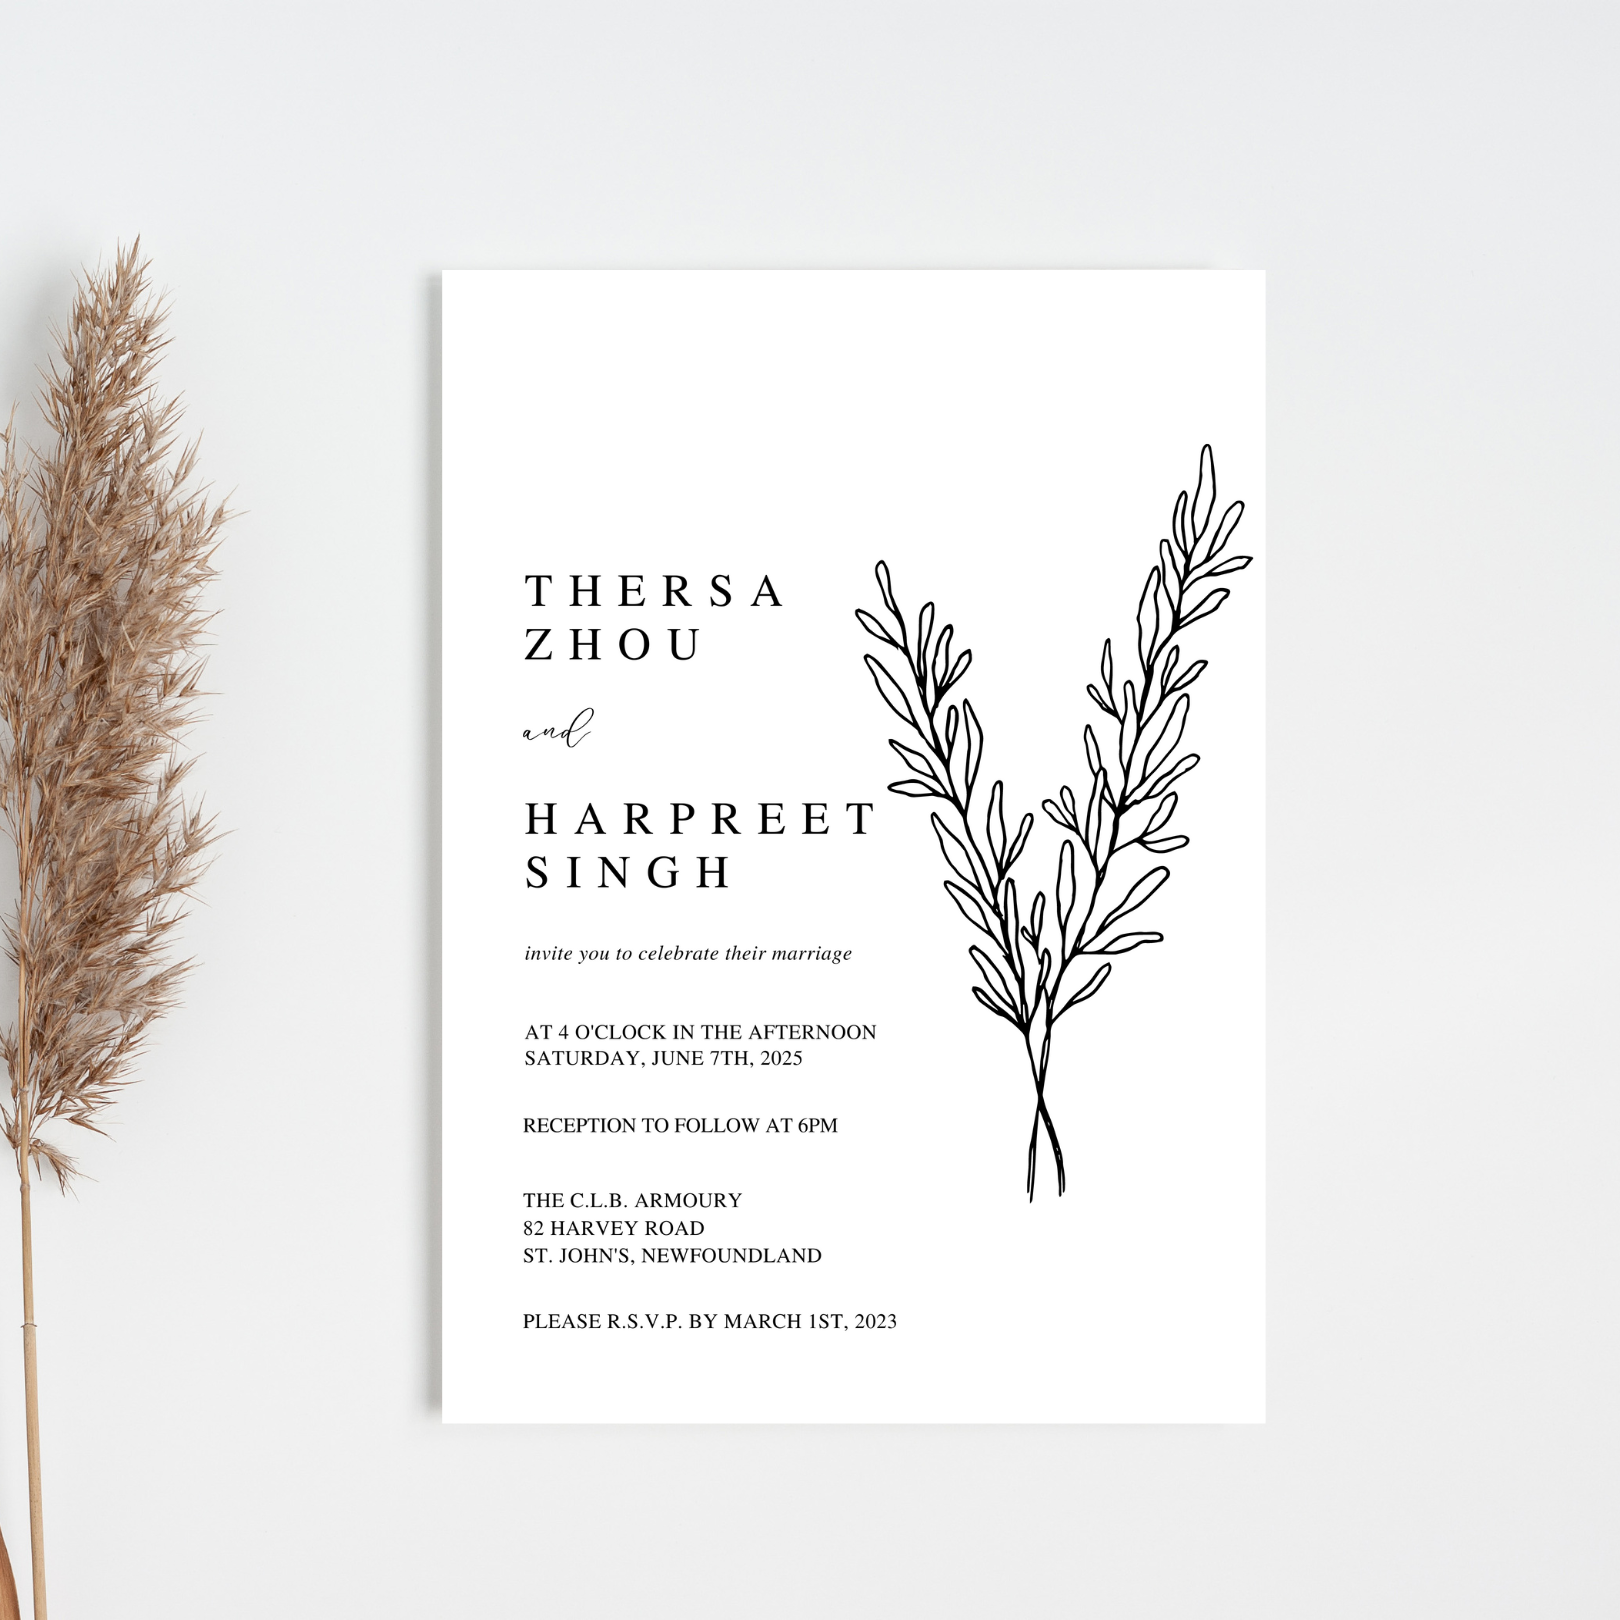 A white, minimalist wedding invitation sits against an off-white background. A piece of pampas grass can be seen peaking out of the left-hand side of the photo.